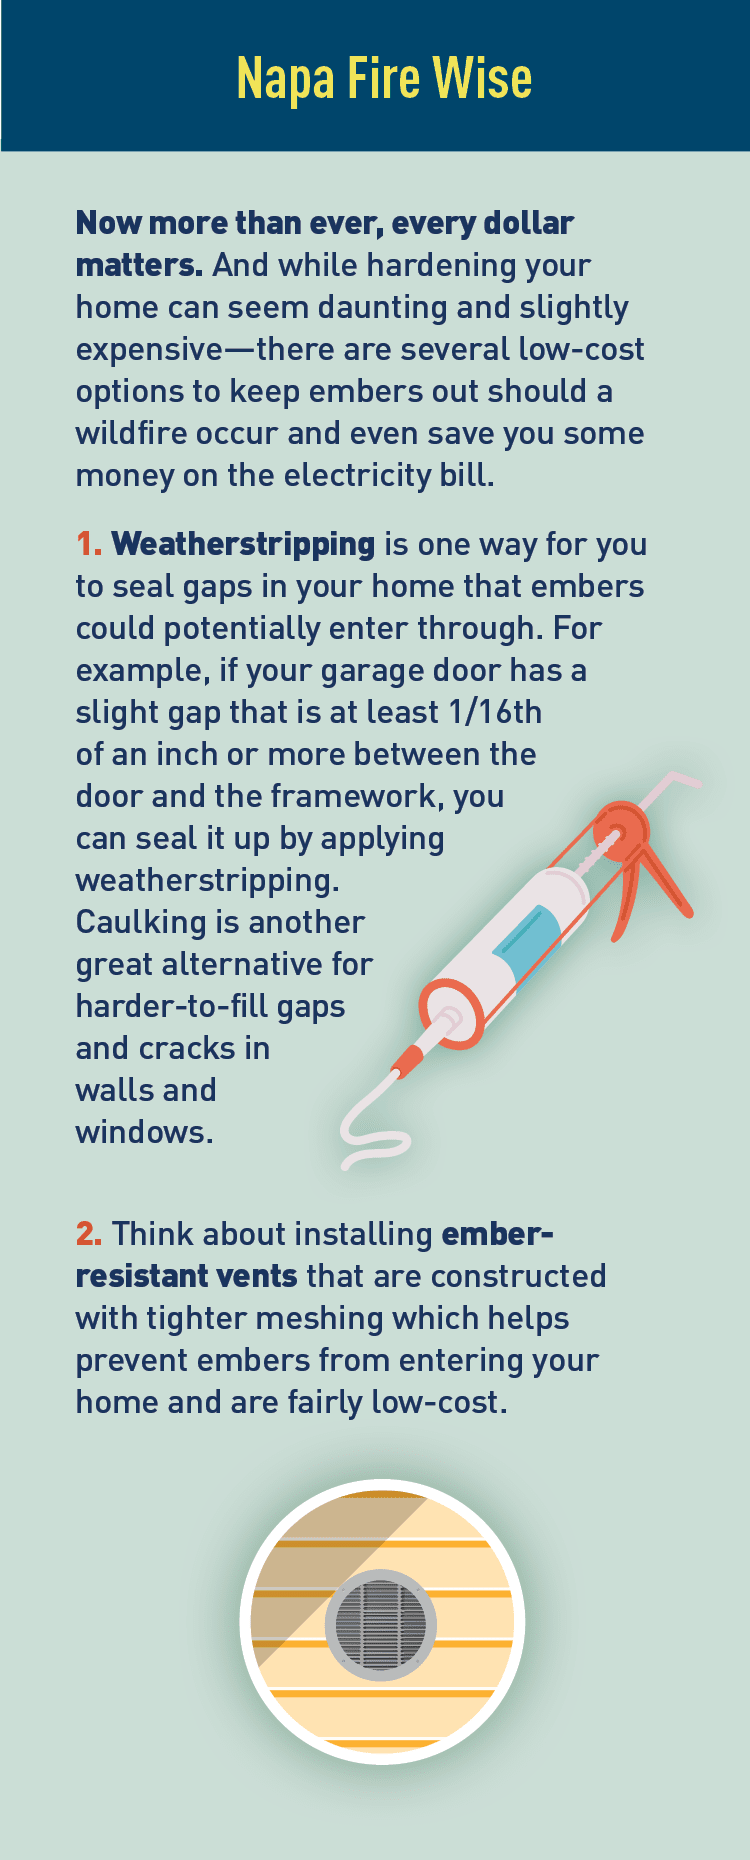 Graphics of caulking and vents